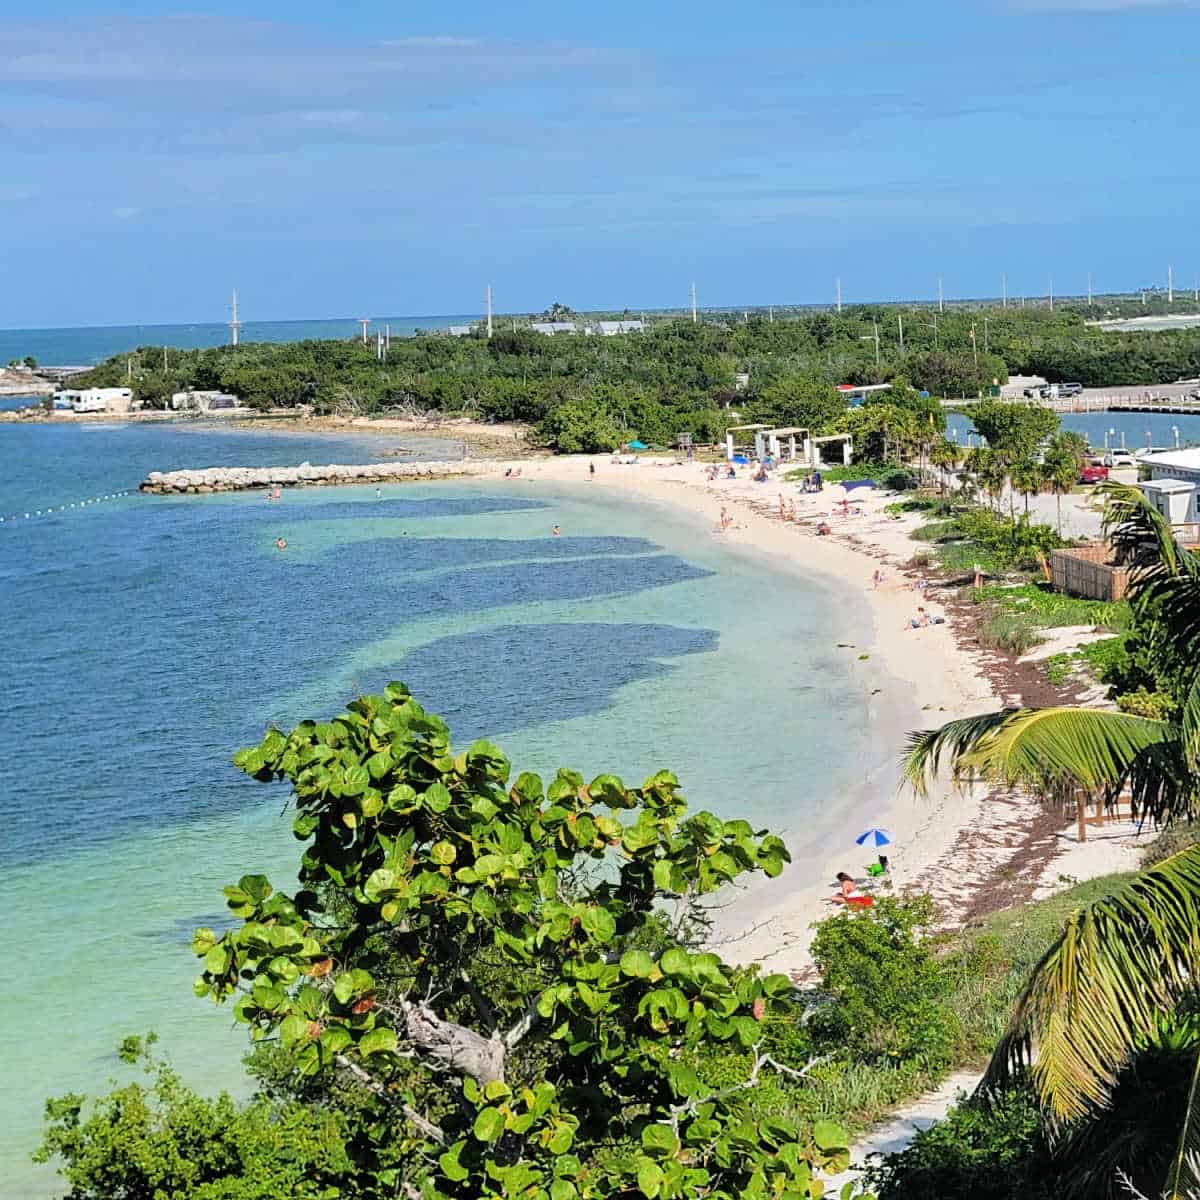 Looking out over the white sand beach and gorgeous waters of Bahia Honda State Park